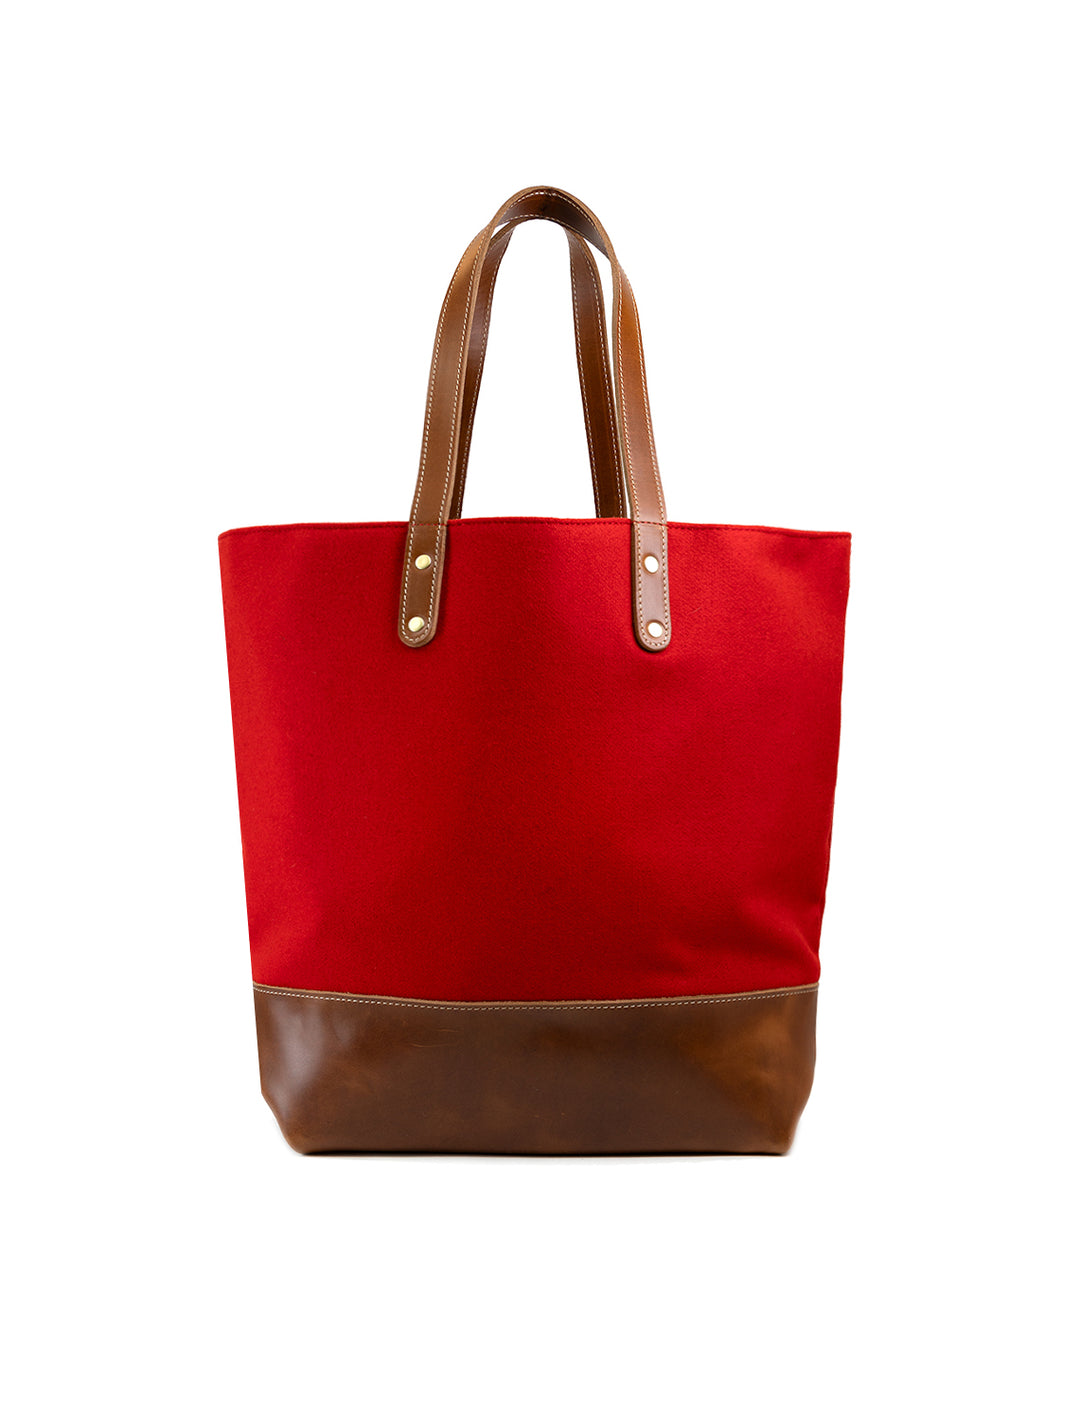 Back view of Heritage Gear's wisconsin red script go bucky tote bag.